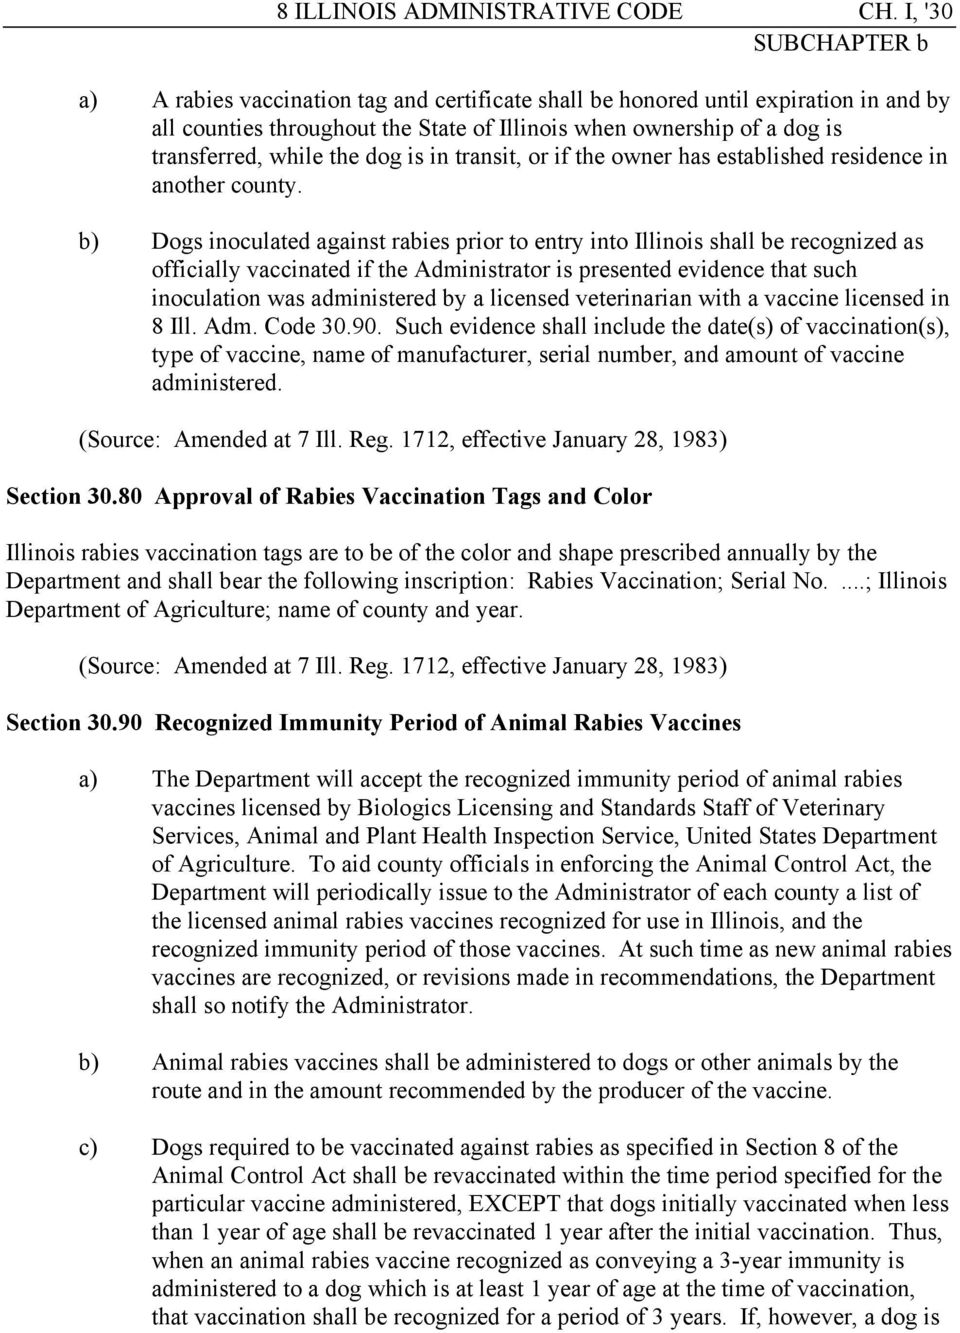 b) Dogs inoculated against rabies prior to entry into Illinois shall be recognized as officially vaccinated if the Administrator is presented evidence that such inoculation was administered by a